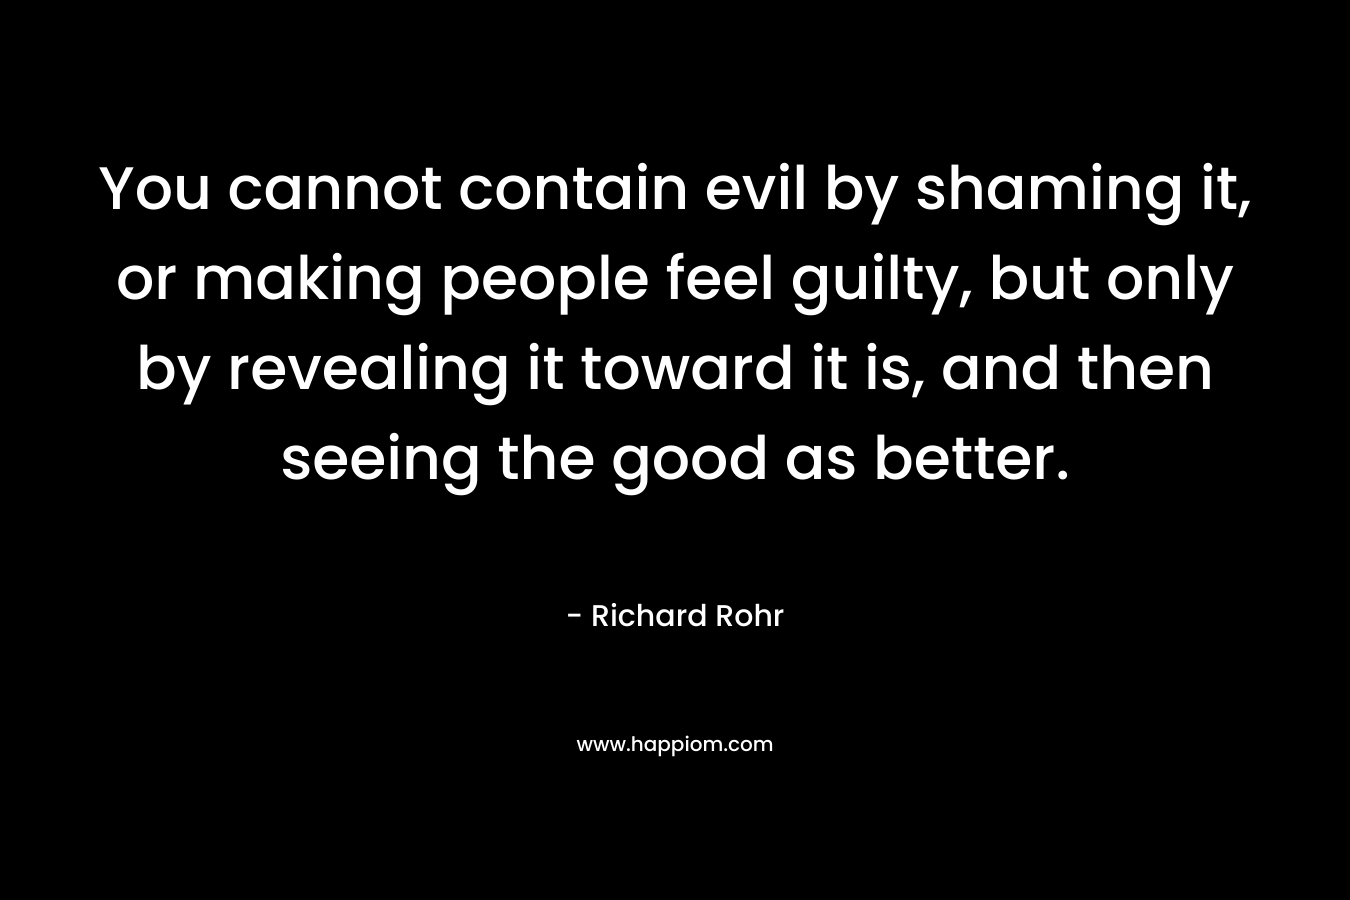 You cannot contain evil by shaming it, or making people feel guilty, but only by revealing it toward it is, and then seeing the good as better. – Richard Rohr